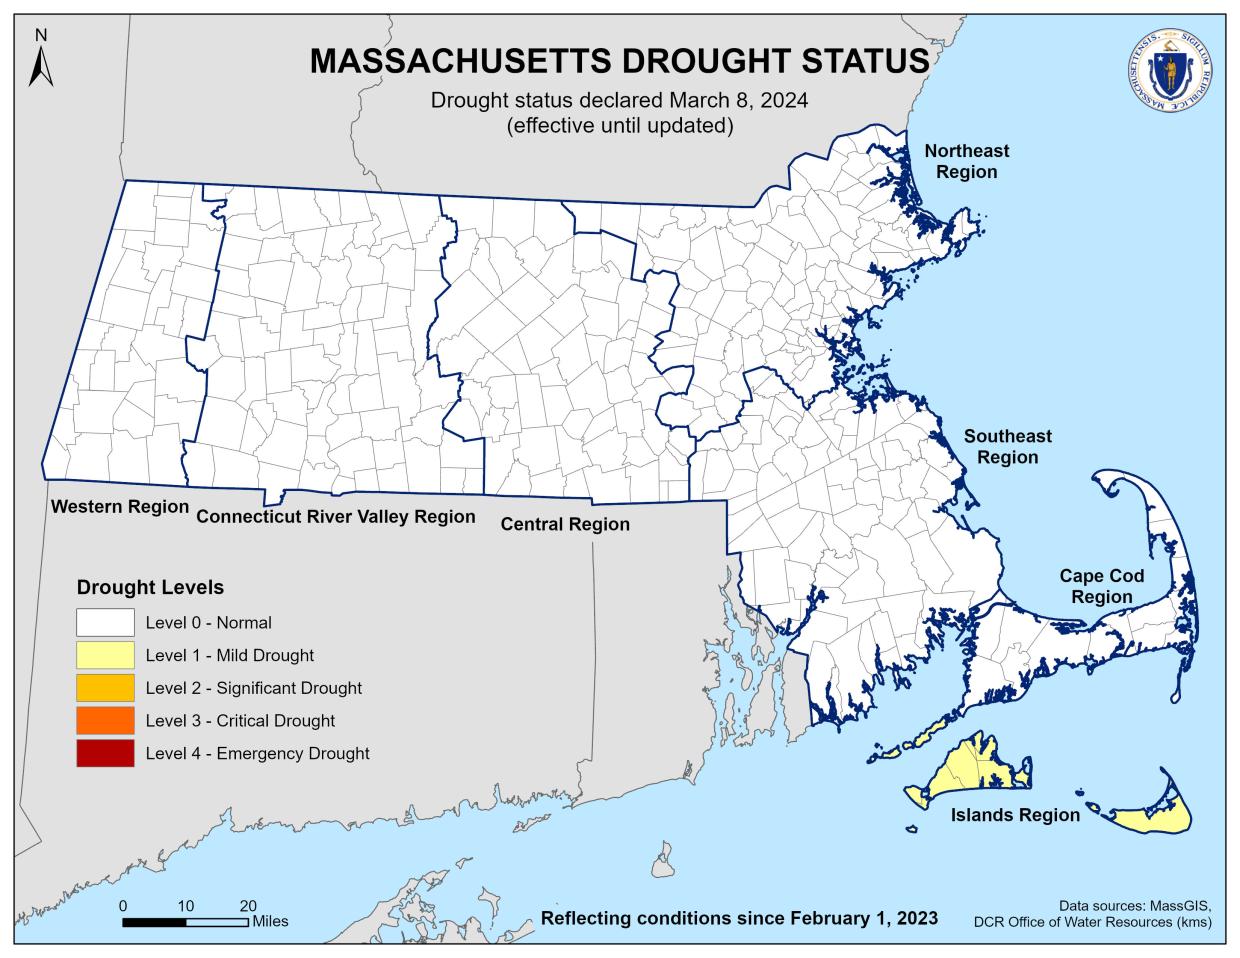 Drought status declared March 8, 2024.(effective until updated)